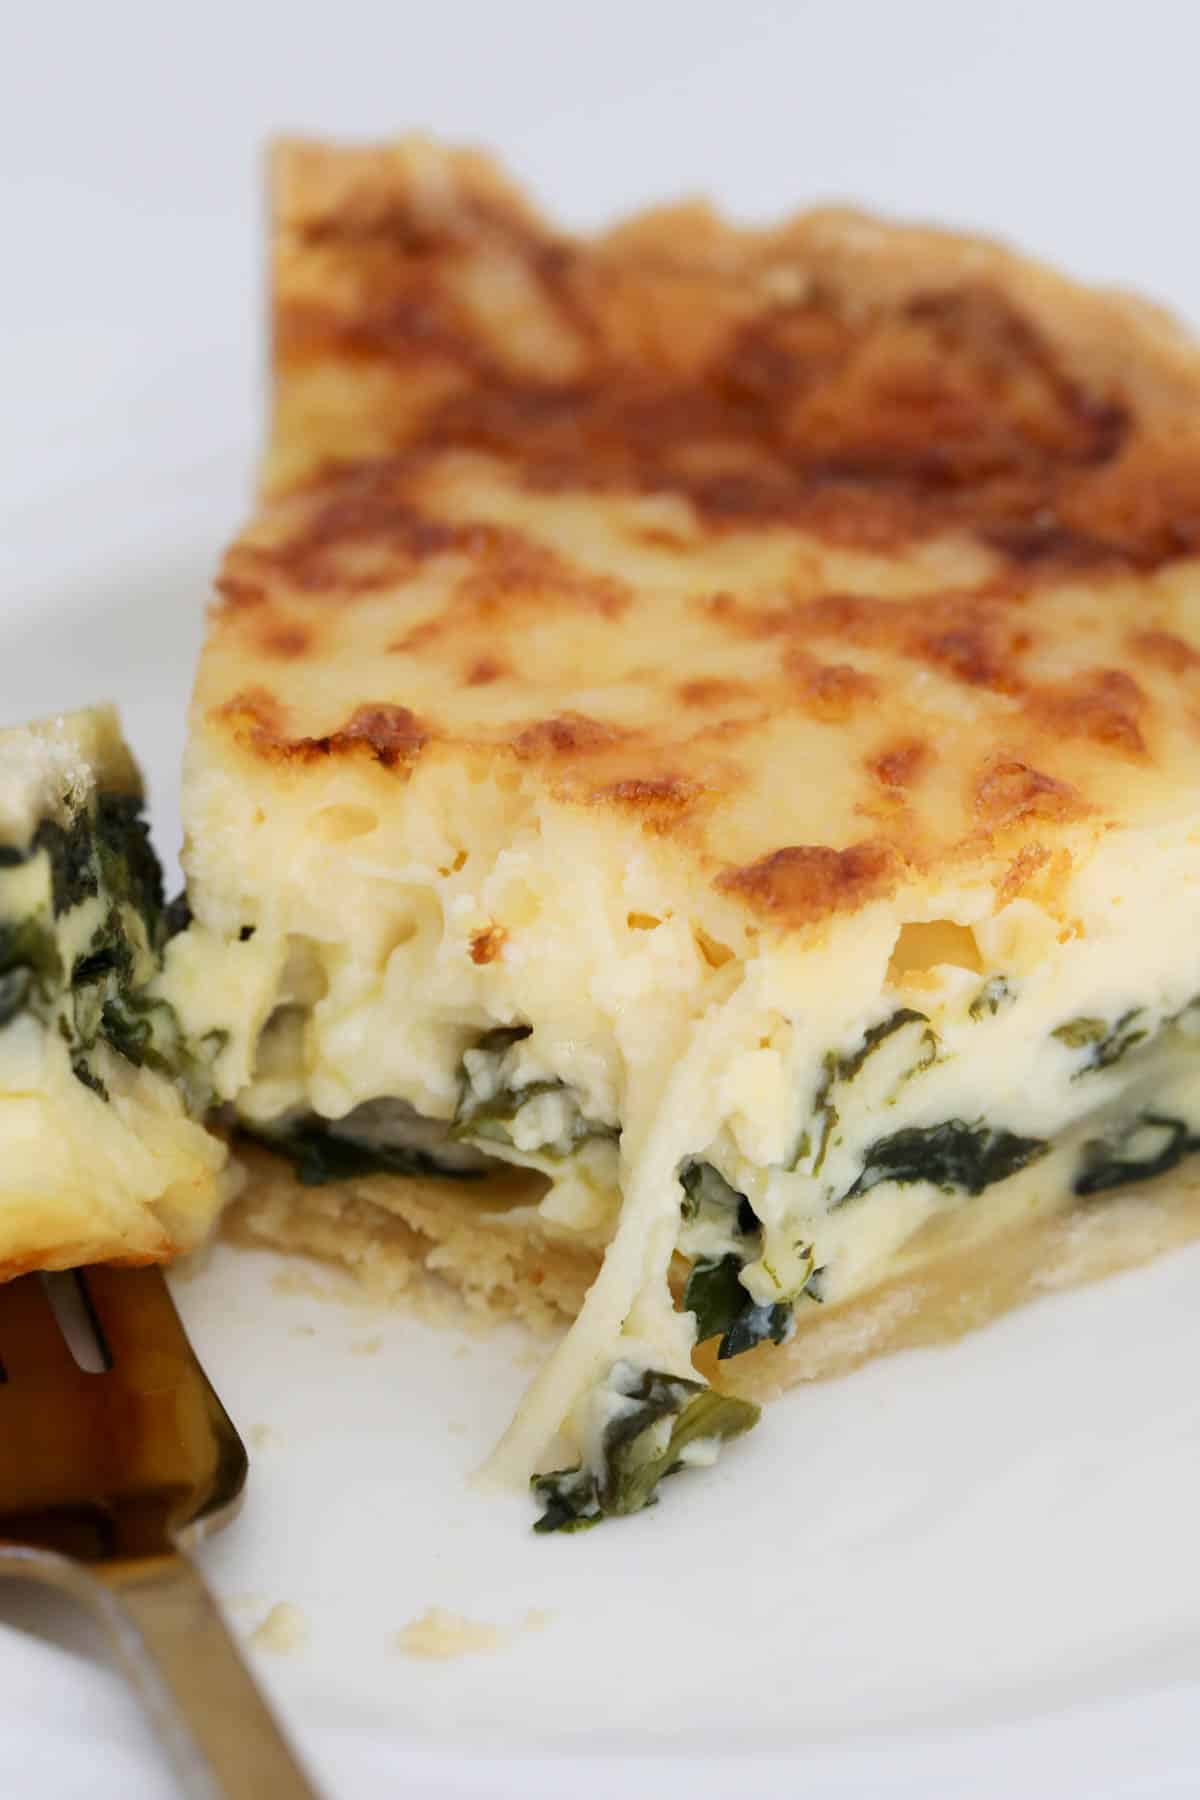 A close up showing a creamy spinach filling and melted cheese.